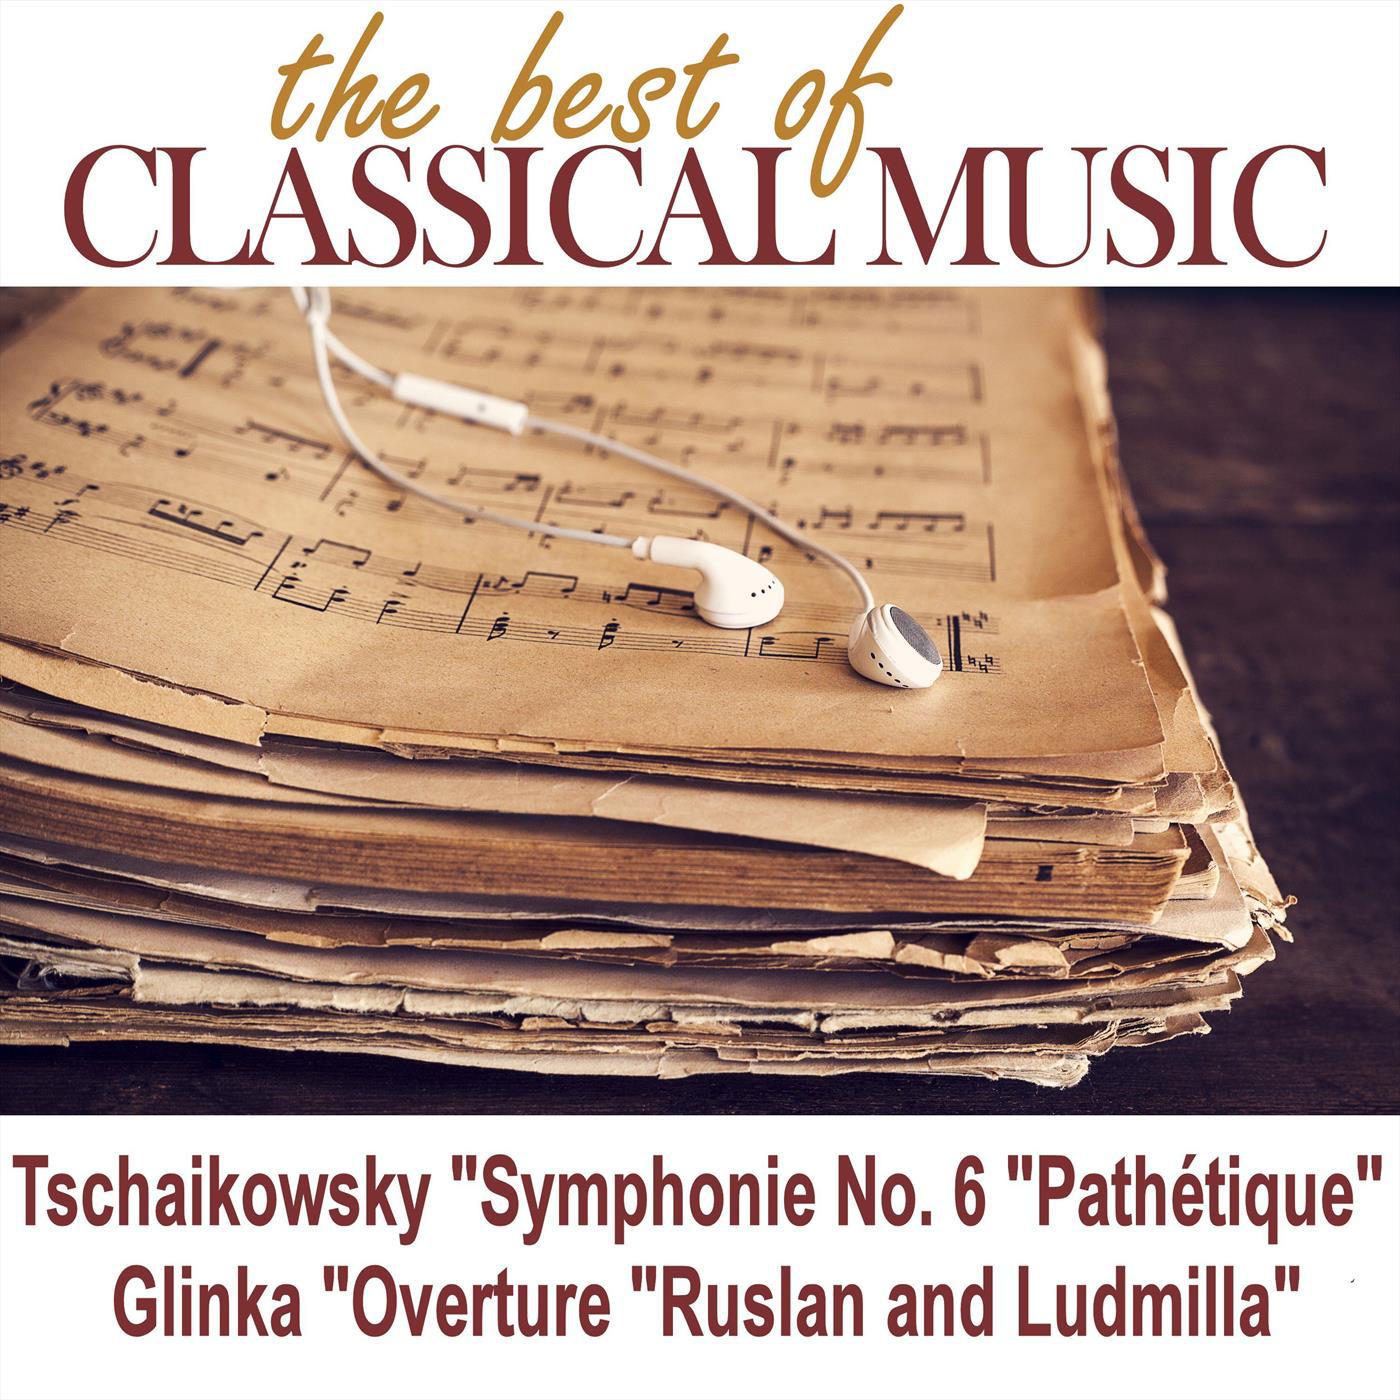 The Best of Classical Music  Tschaikowsky " Symphonie No. 6 " Pathe tique"  Glinka " Overture " Ruslan and Ludmilla"